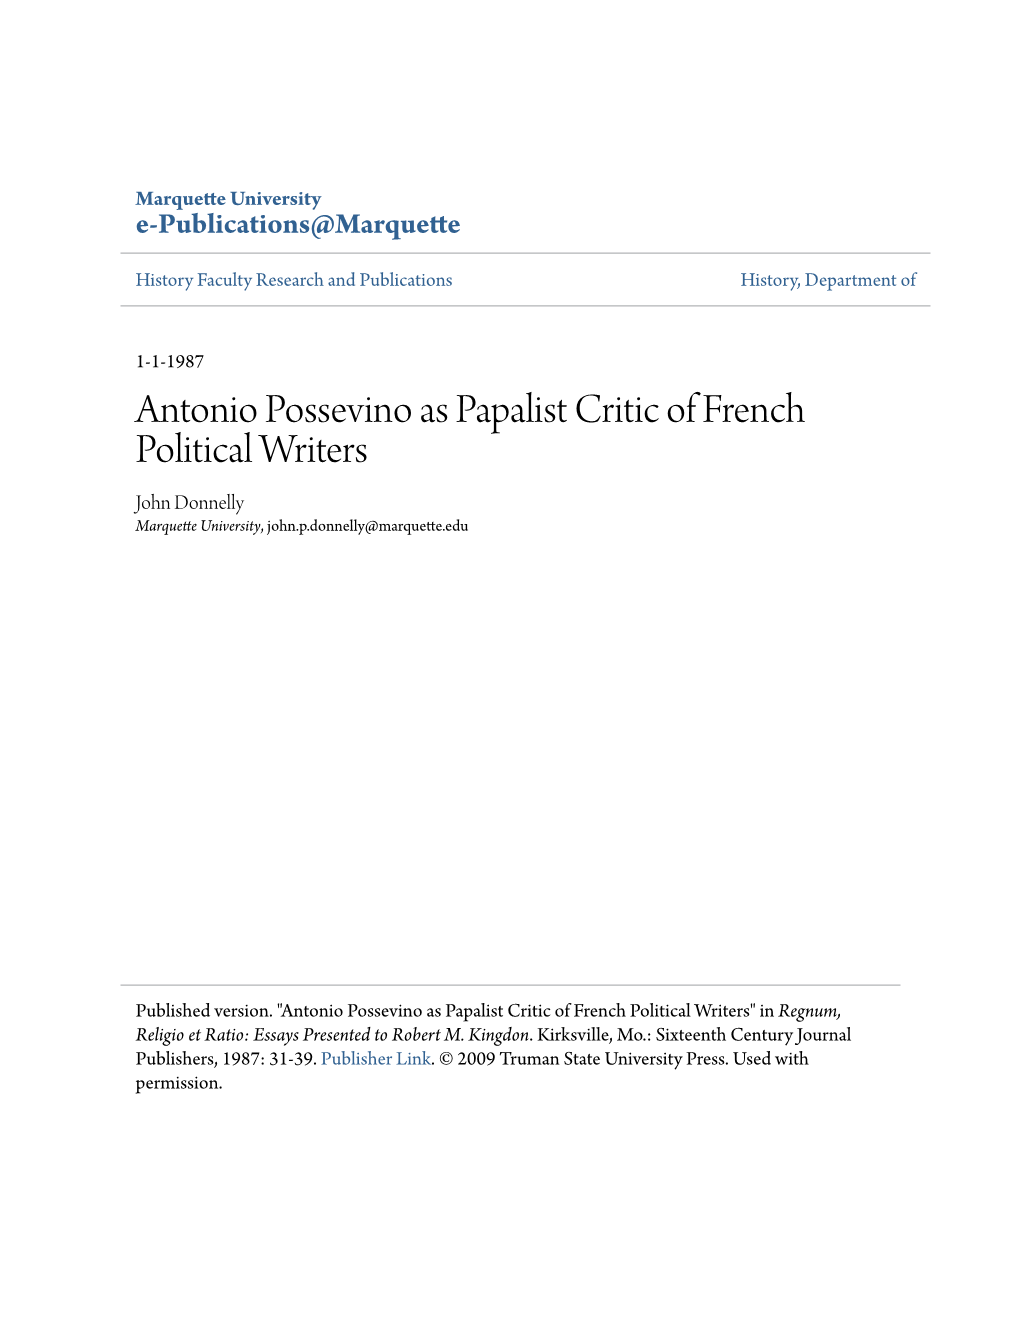 Antonio Possevino As Papalist Critic of French Political Writers John Donnelly Marquette University, John.P.Donnelly@Marquette.Edu